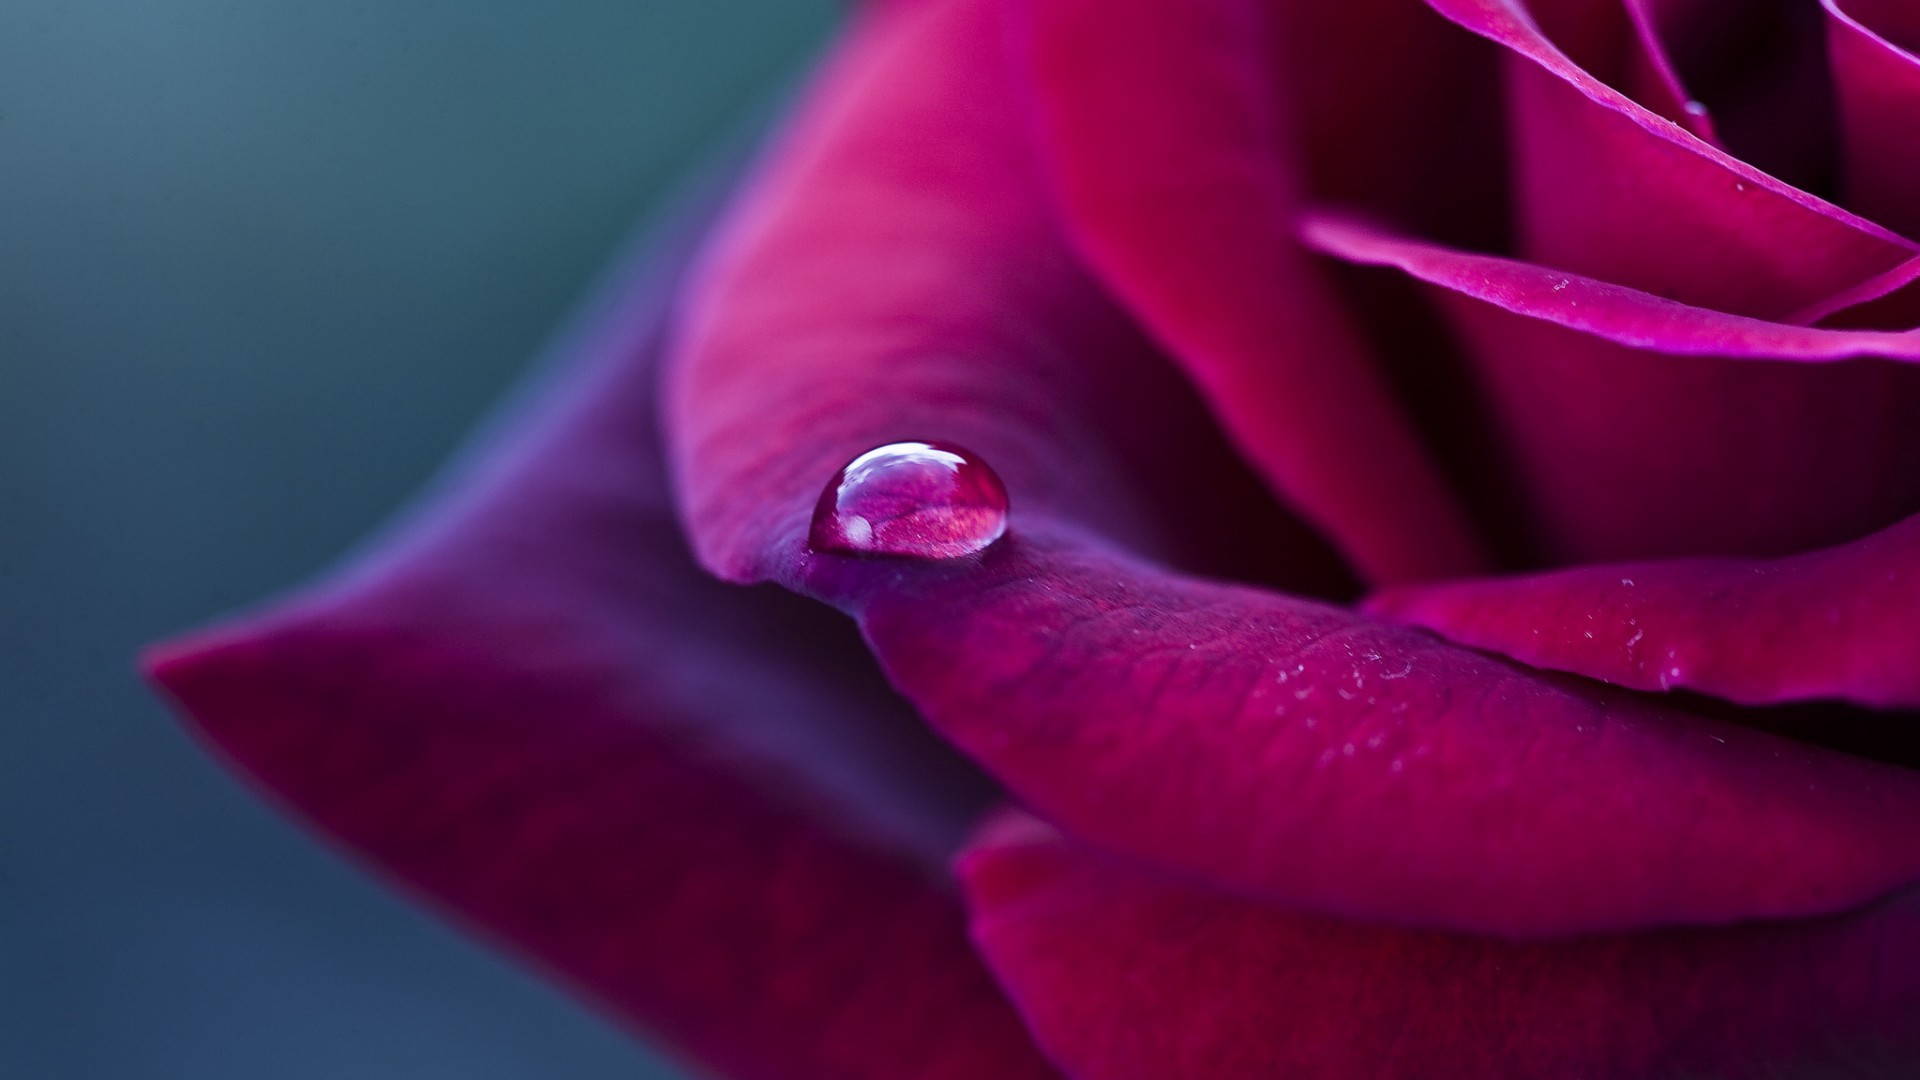 Purple rose and drop of rain wallpapers and images - wallpapers ...